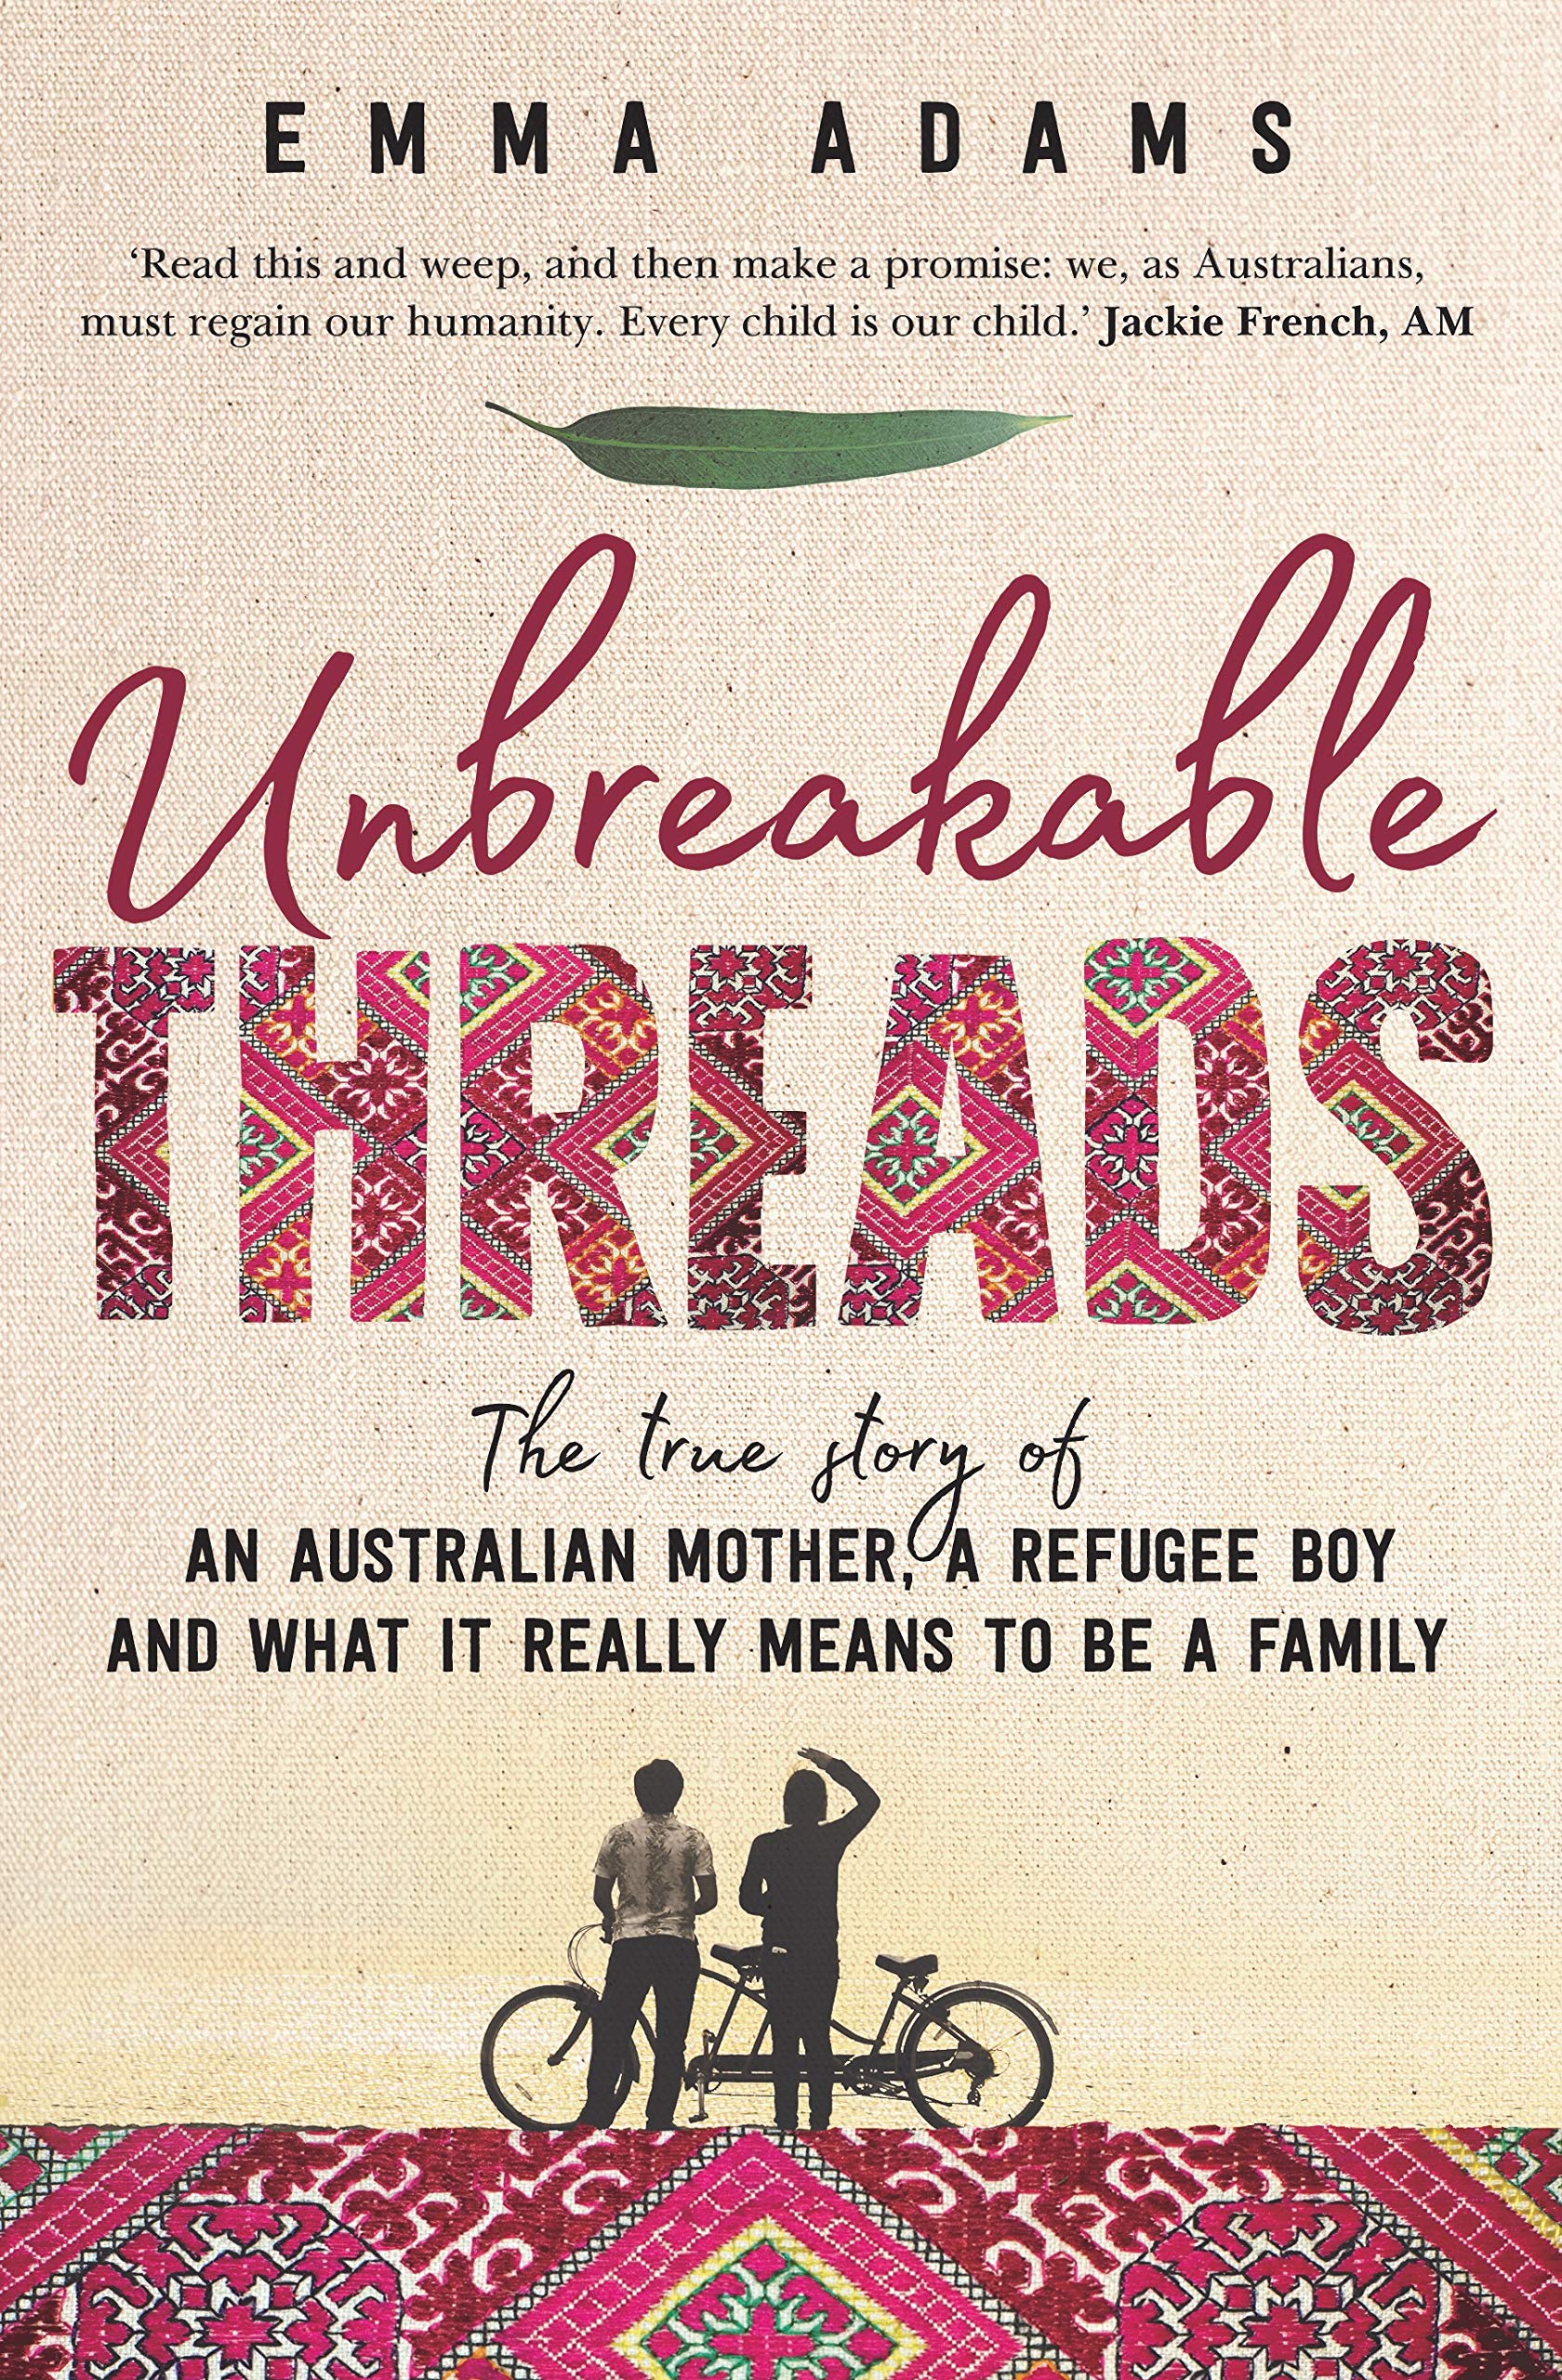 Unbreakable Threads: The true story of an Australian mother, a refugee boy and what it really means to be a family